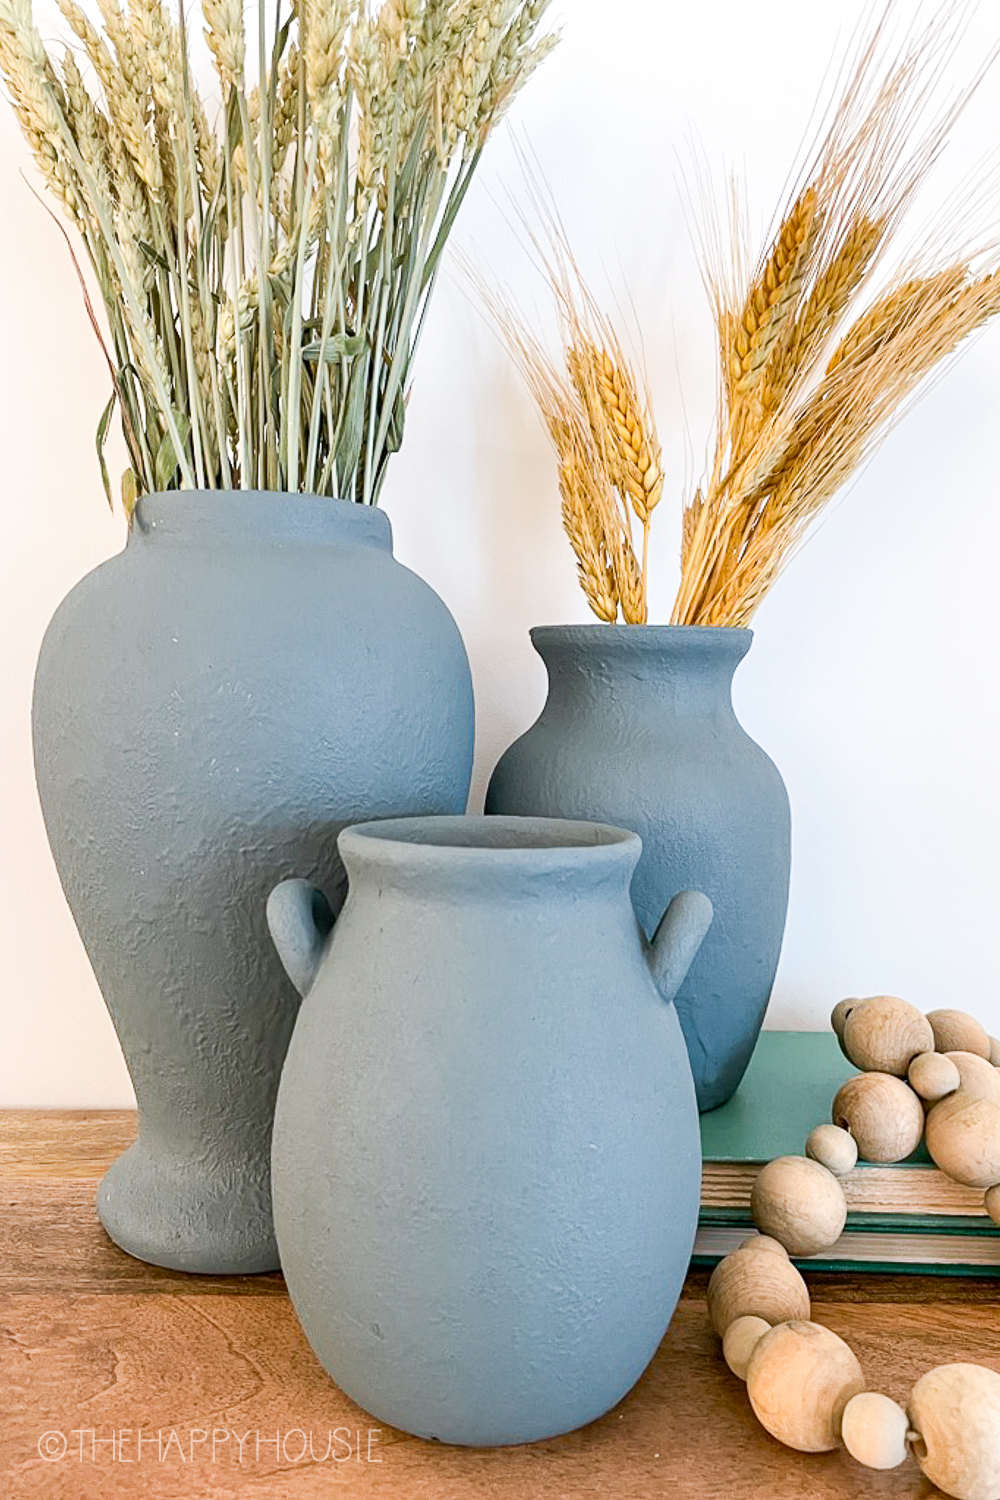 Fall Home Decor: DIY Textured Vase with Paint & Baking Soda